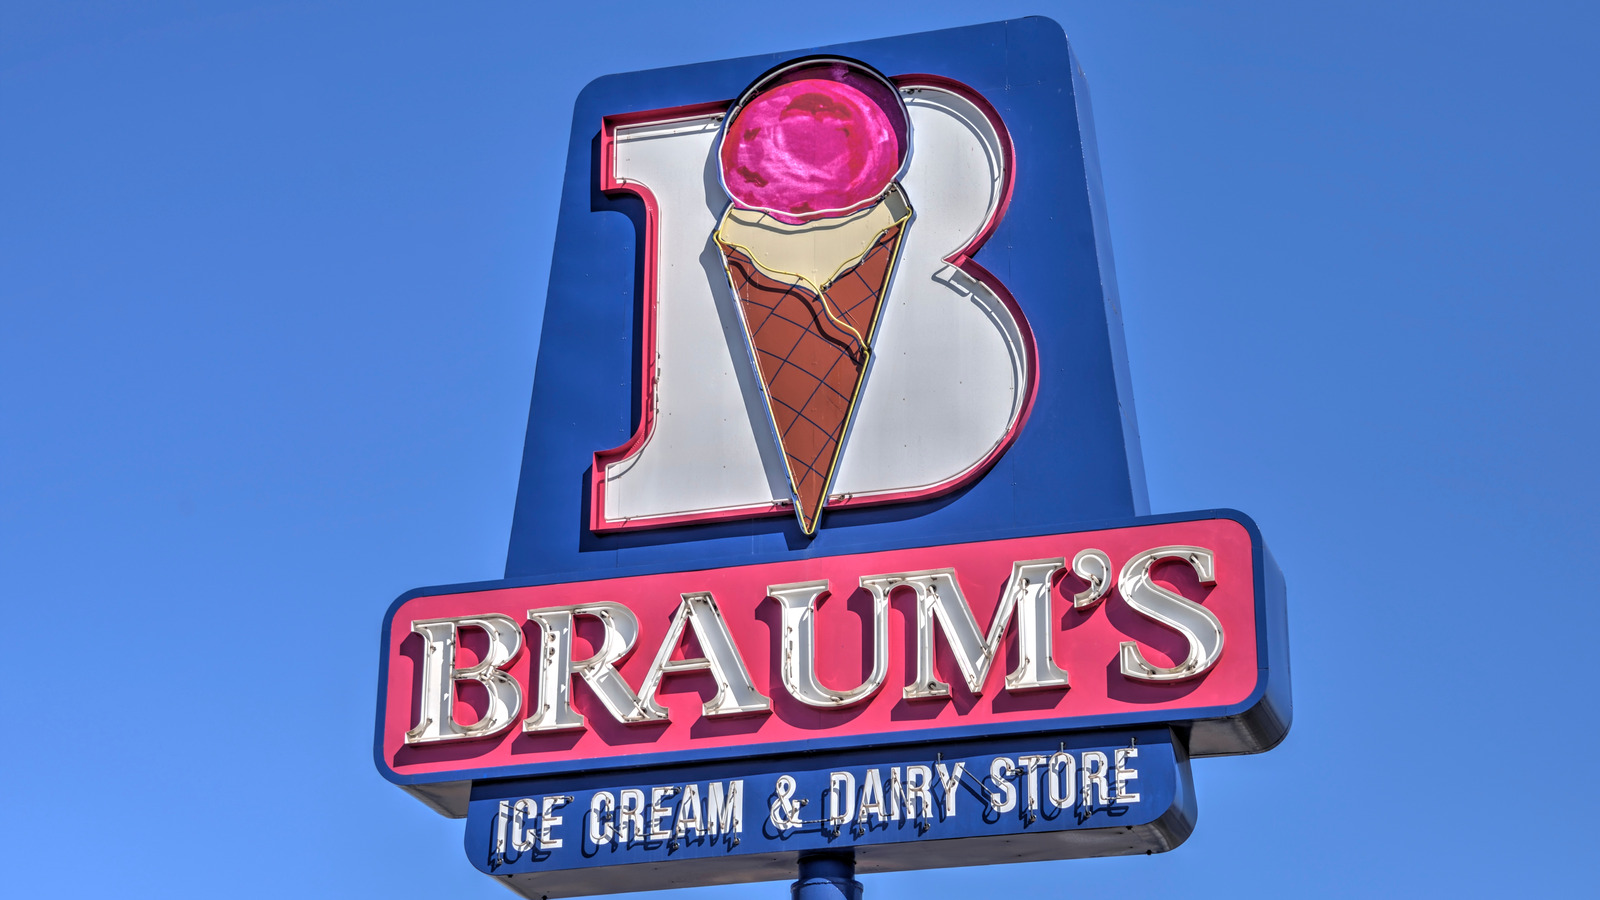 https://www.mashed.com/img/gallery/popular-braums-ice-cream-flavors-ranked-worst-to-best/l-intro-1631557678.jpg